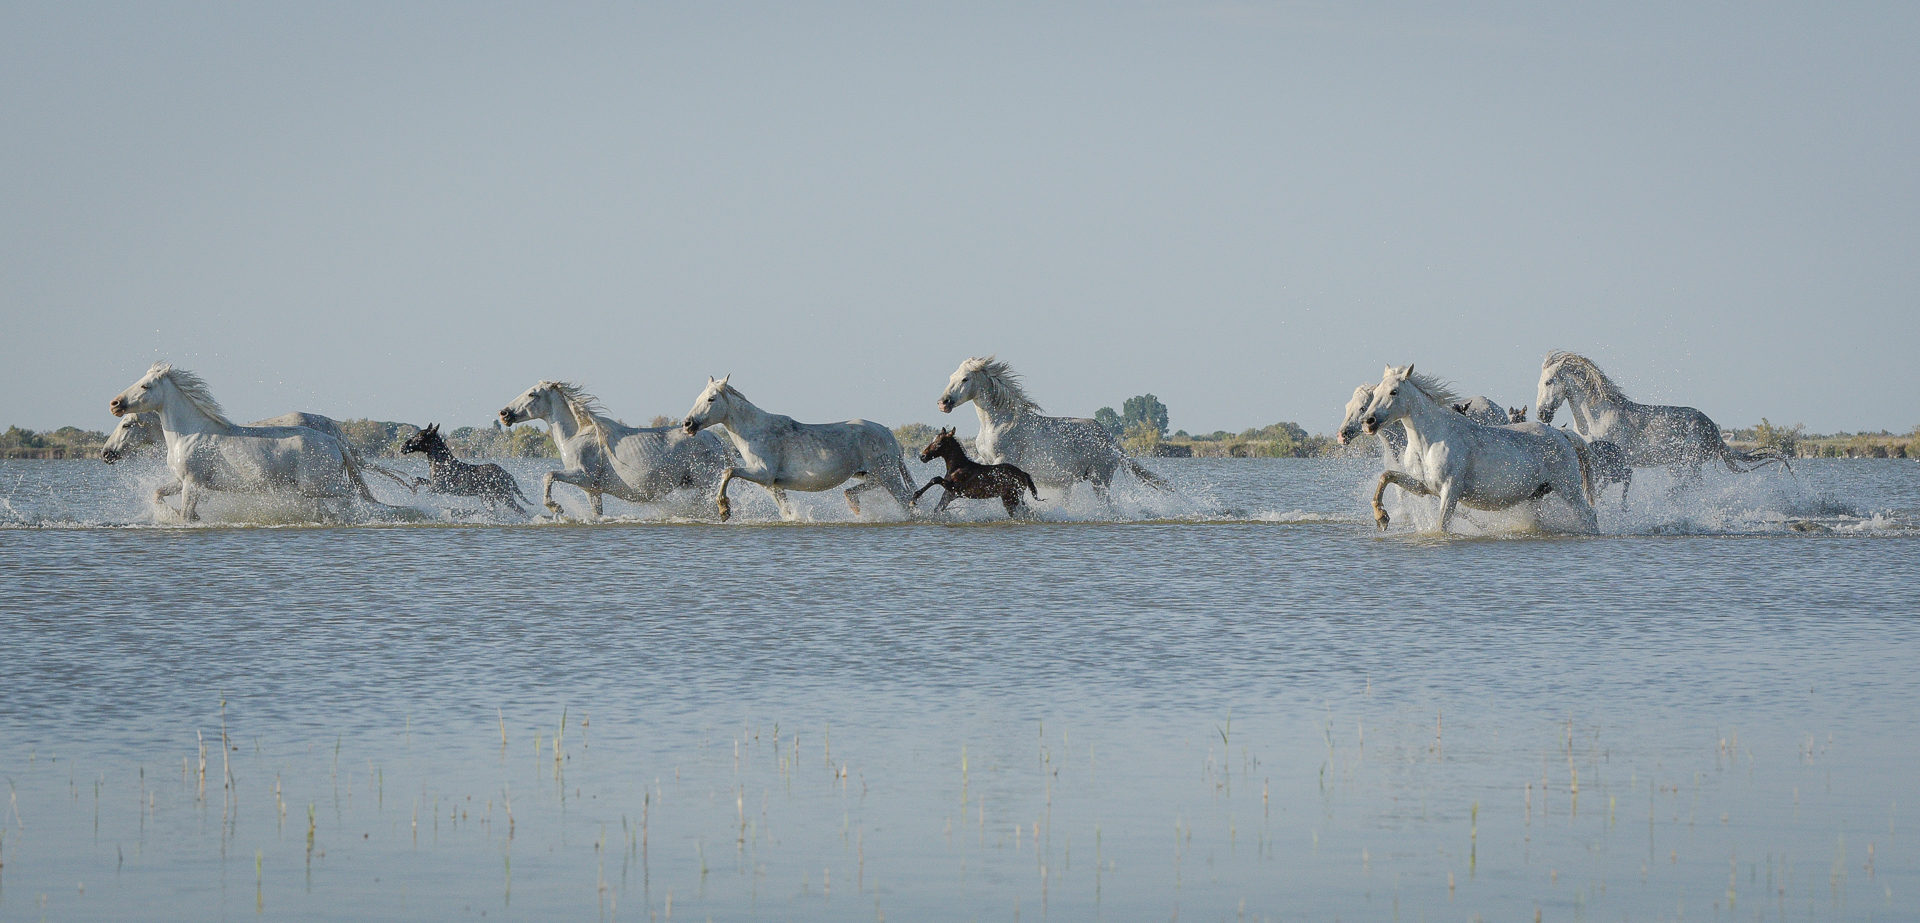 Rush Hour in Camargue